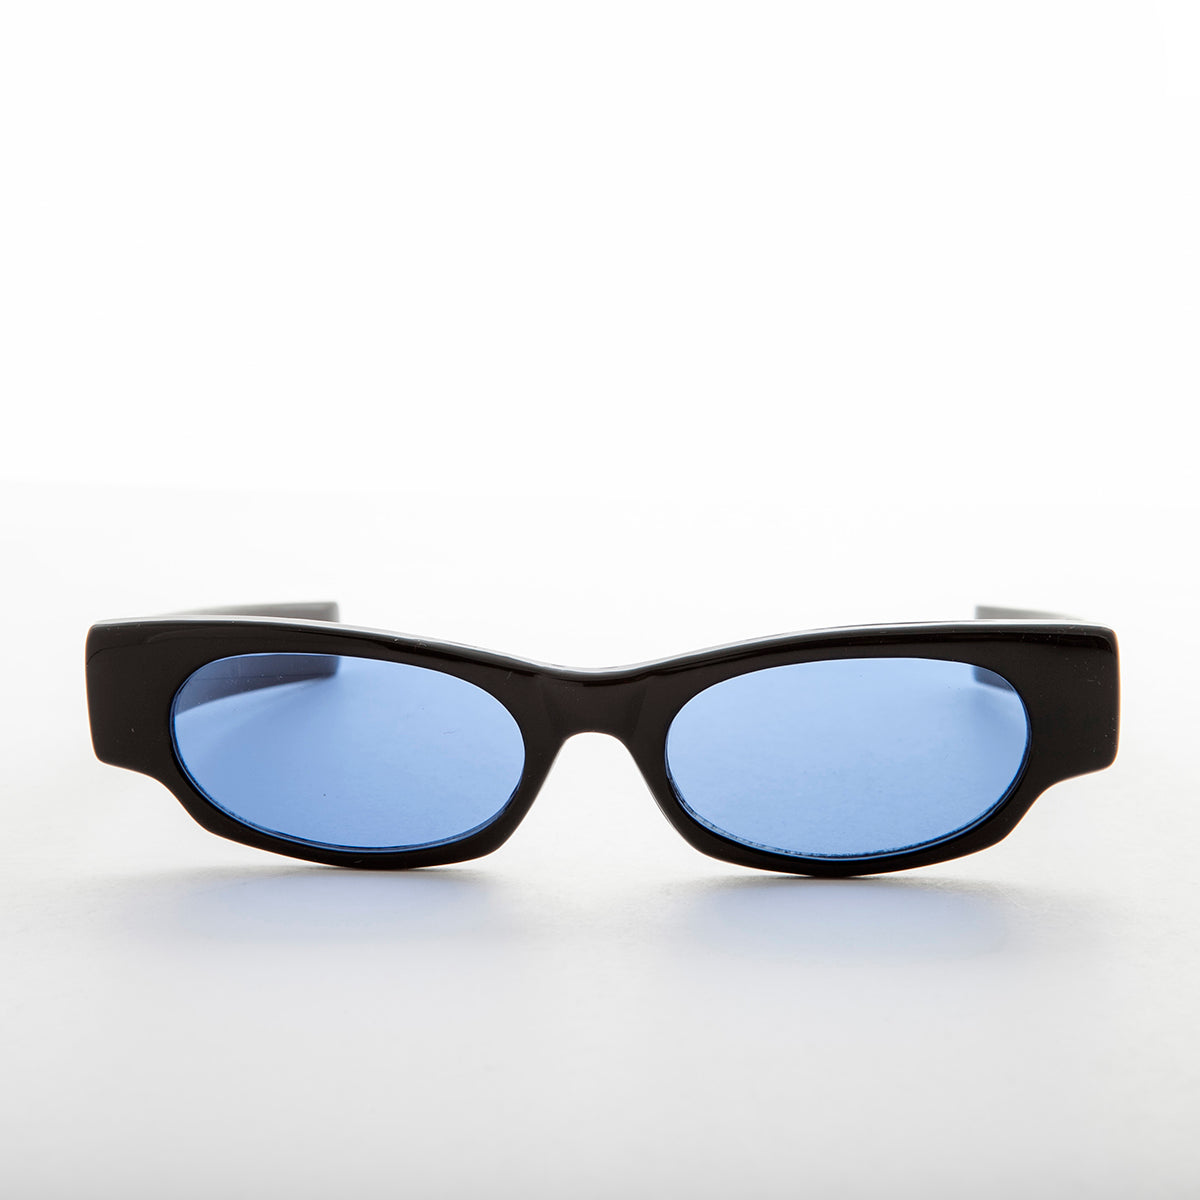 Slim Cruiser Vintage Sunglass with Blue Tinted Lens